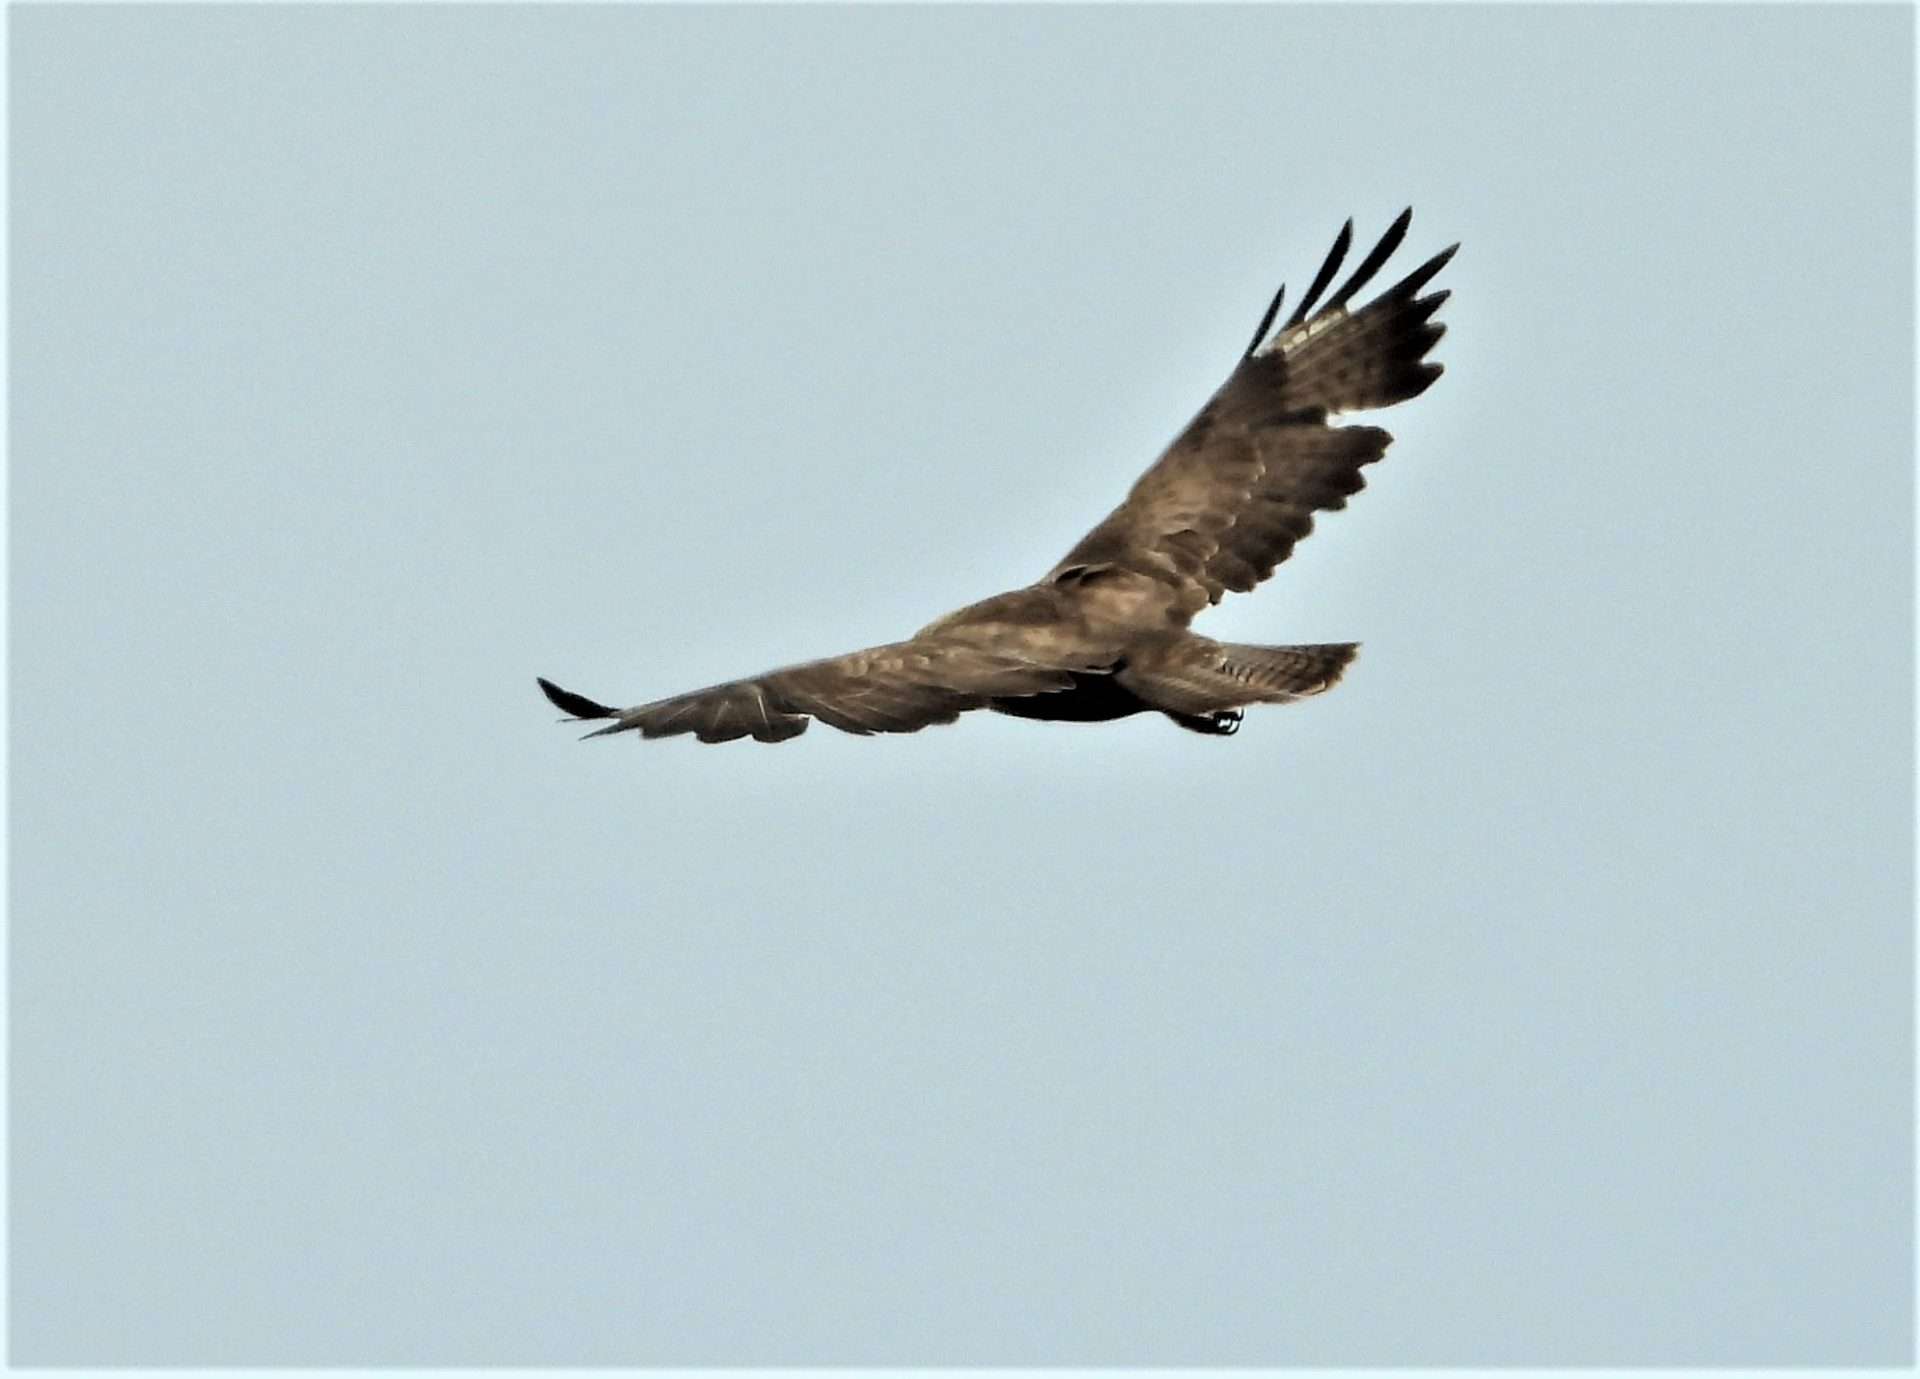 Buzzard by Kenneth at Haccombe